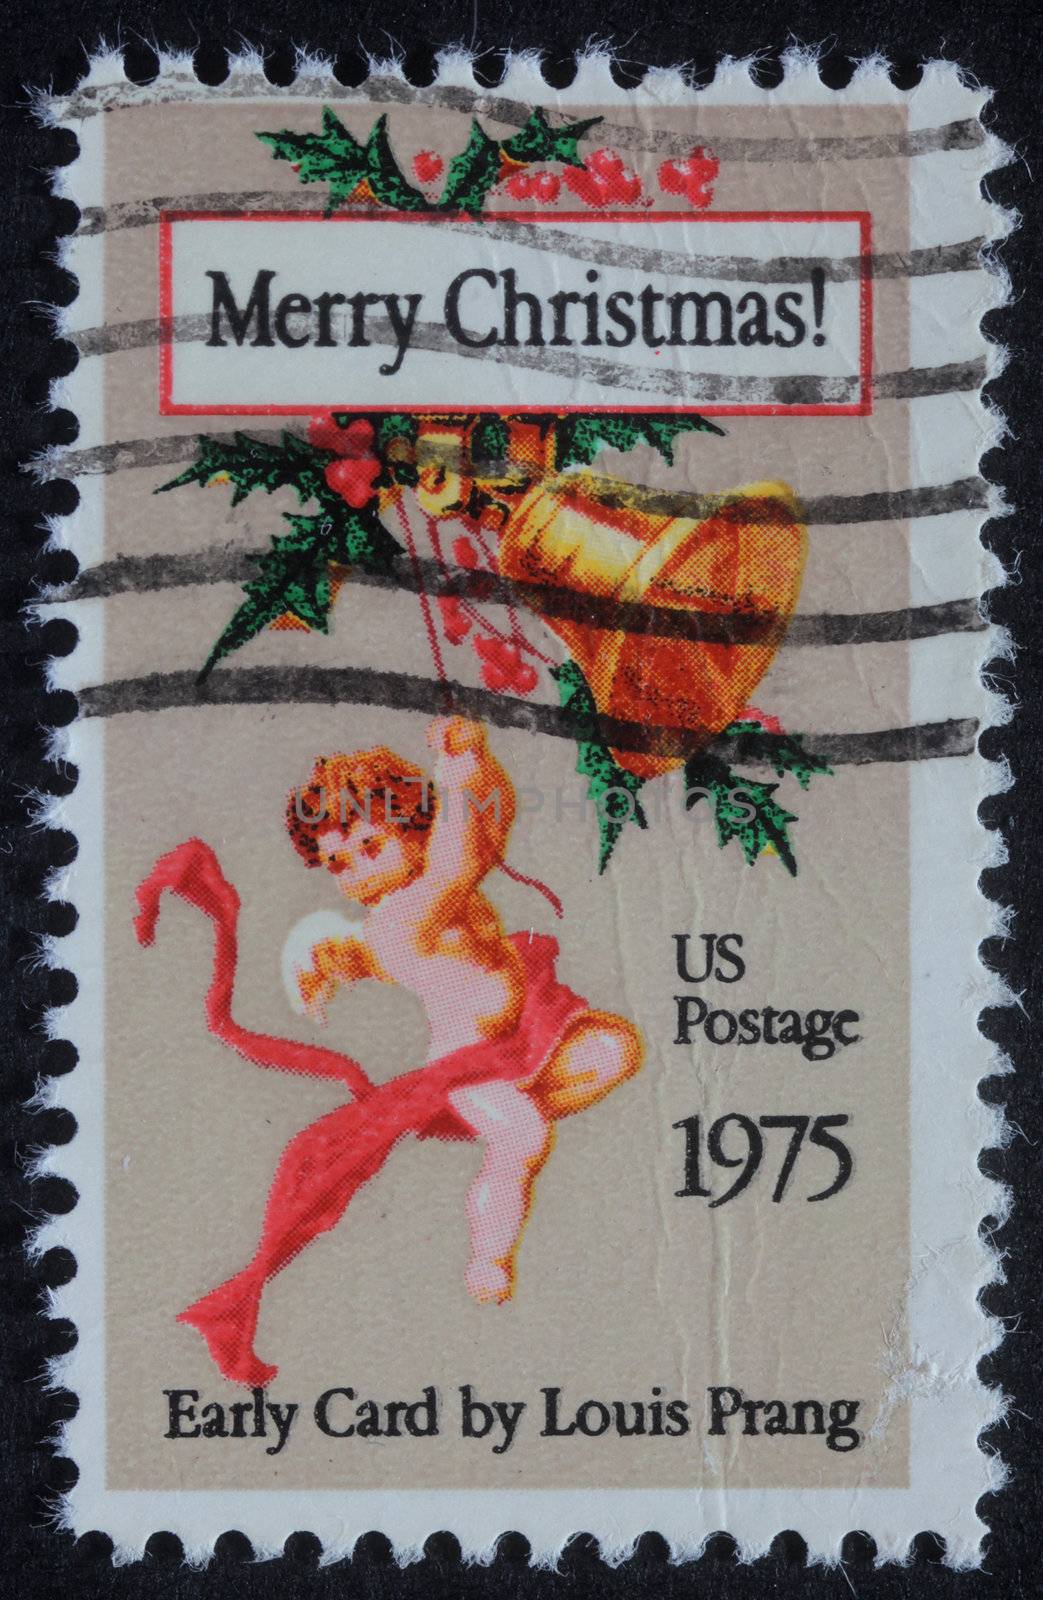 UNITED STATES OF AMERICA - CIRCA 1975: A greeting Christmas stamp printed in USA showing angel